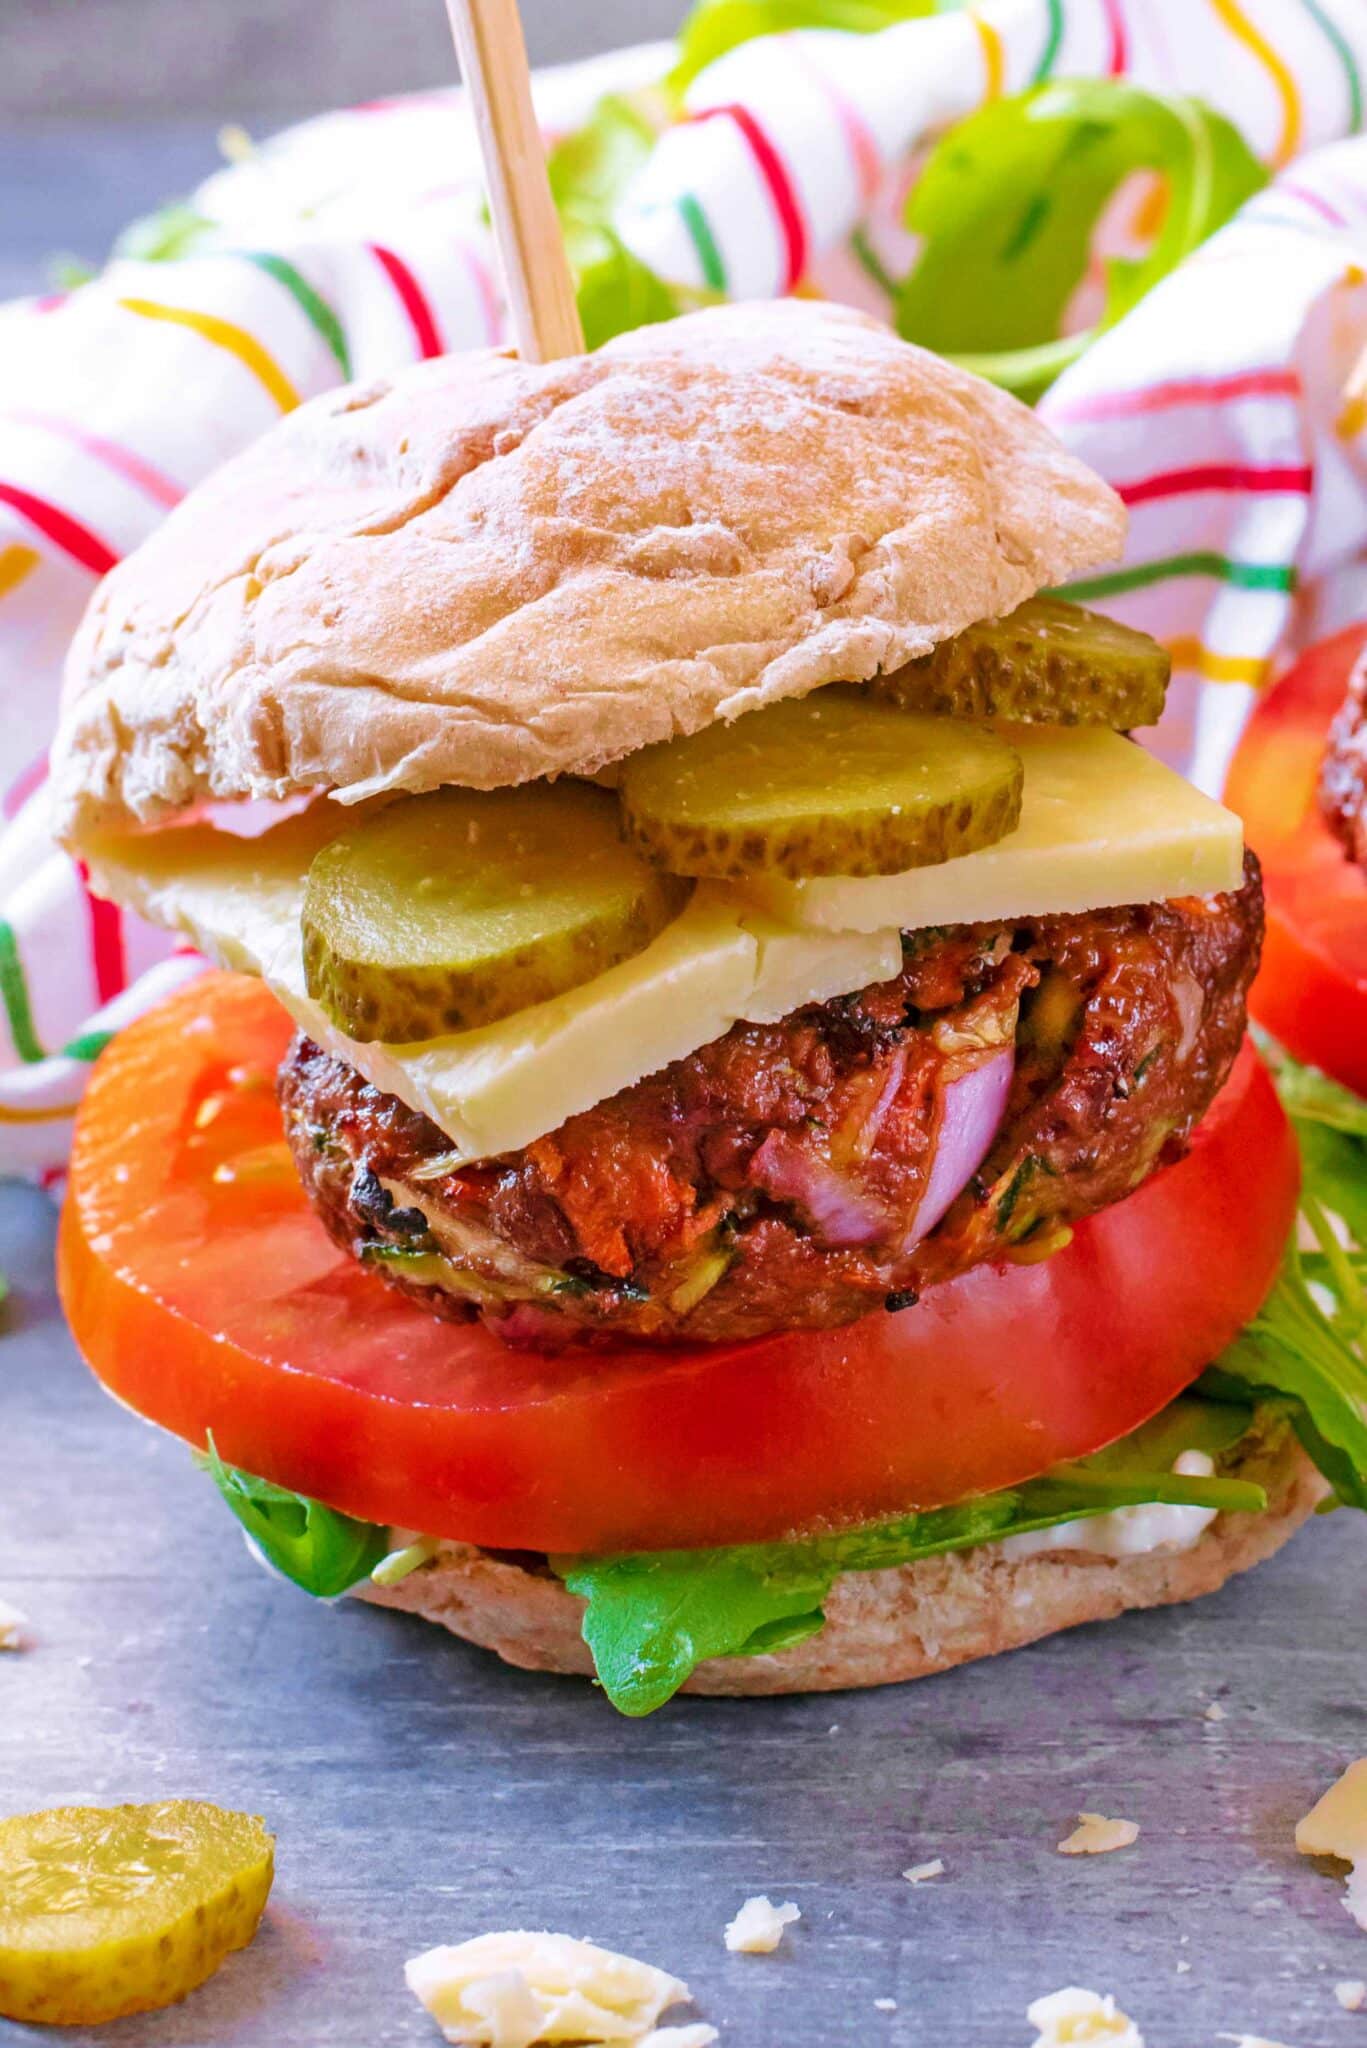 A burger made up of bun, lettuce, tomato, beef patty, cheese and pickles.